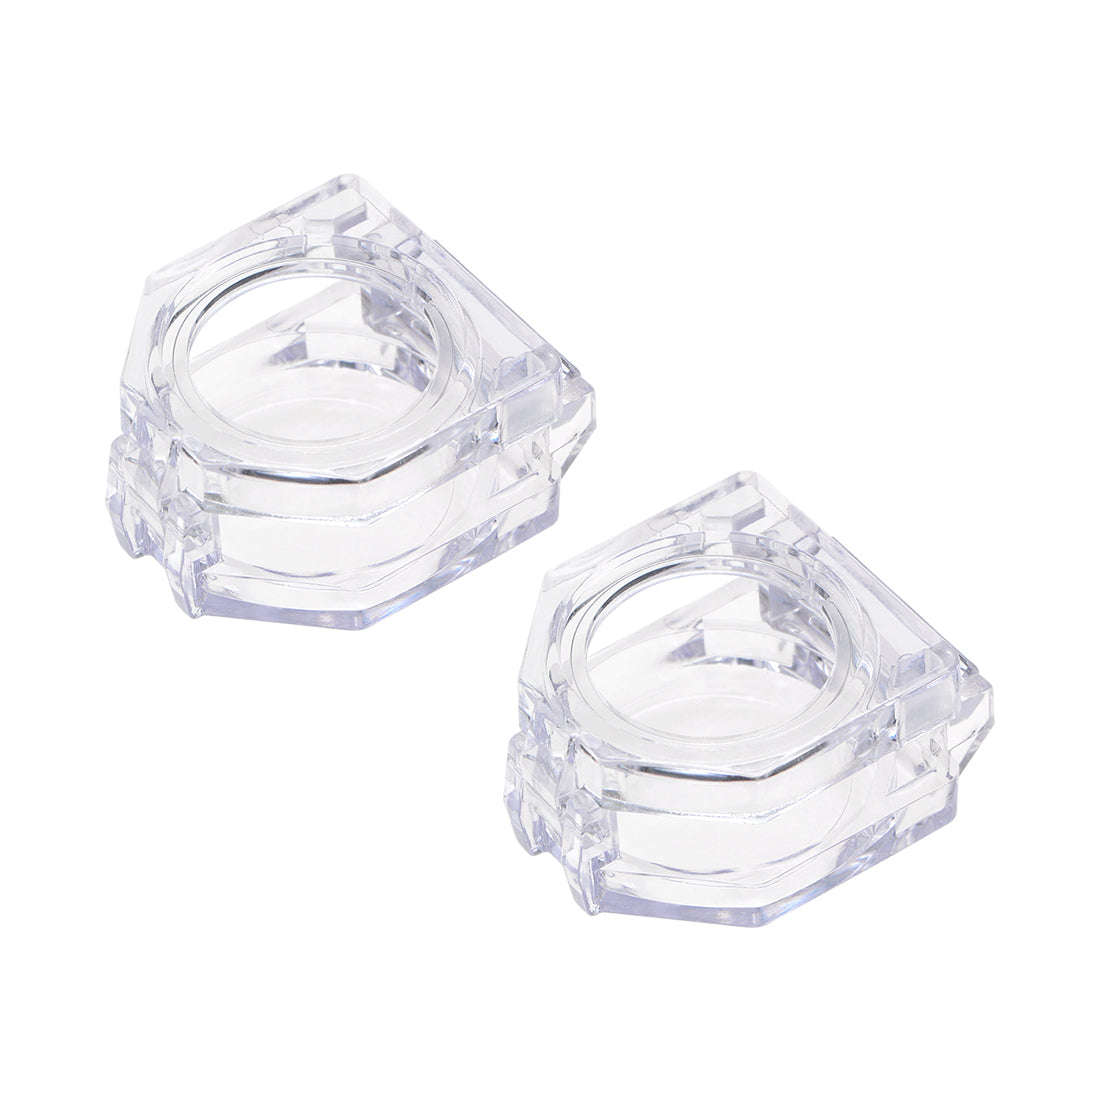 uxcell Uxcell 2pcs, Clear Plastic Switch Cover Protector for 22mm Diameter Push Button Switch